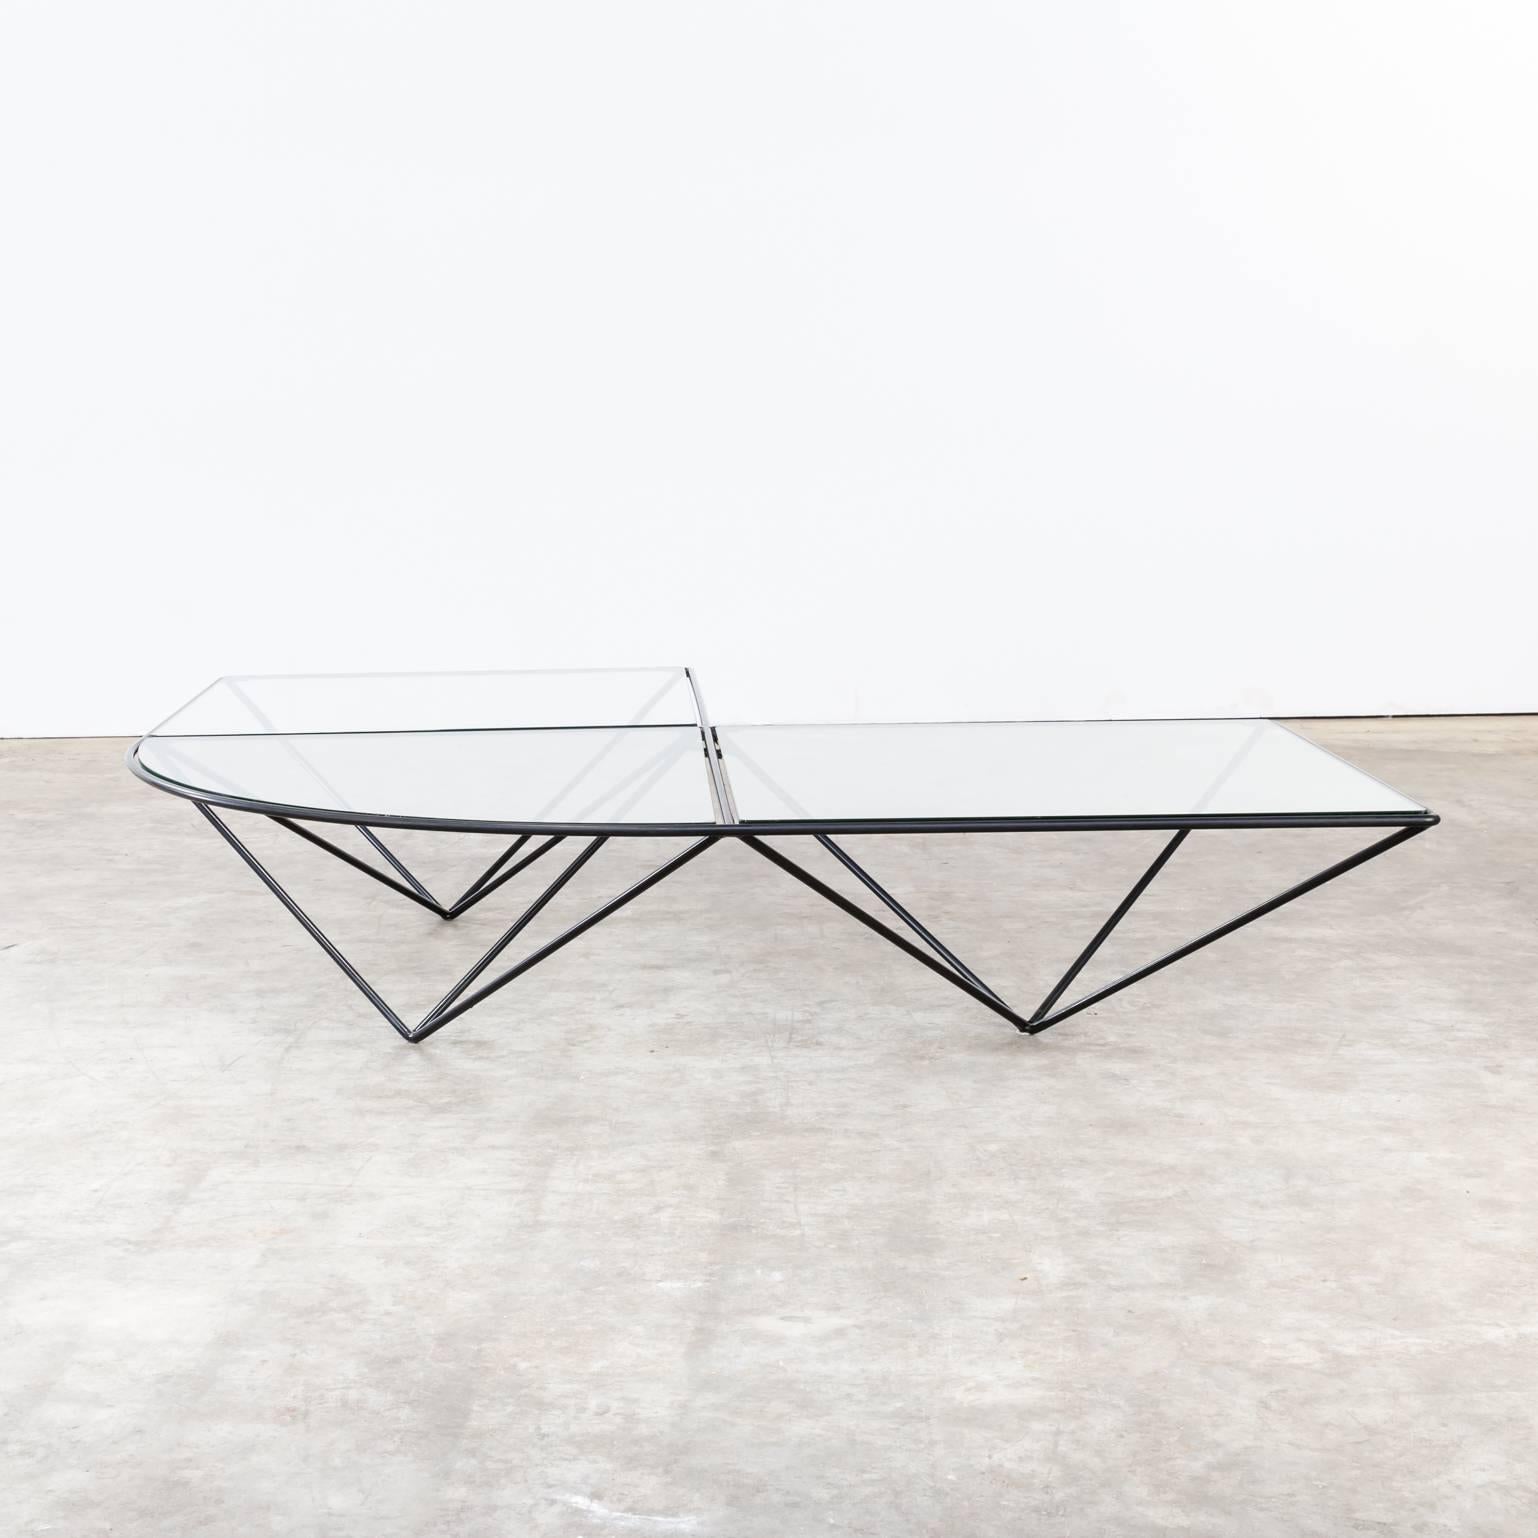 paolo piva table